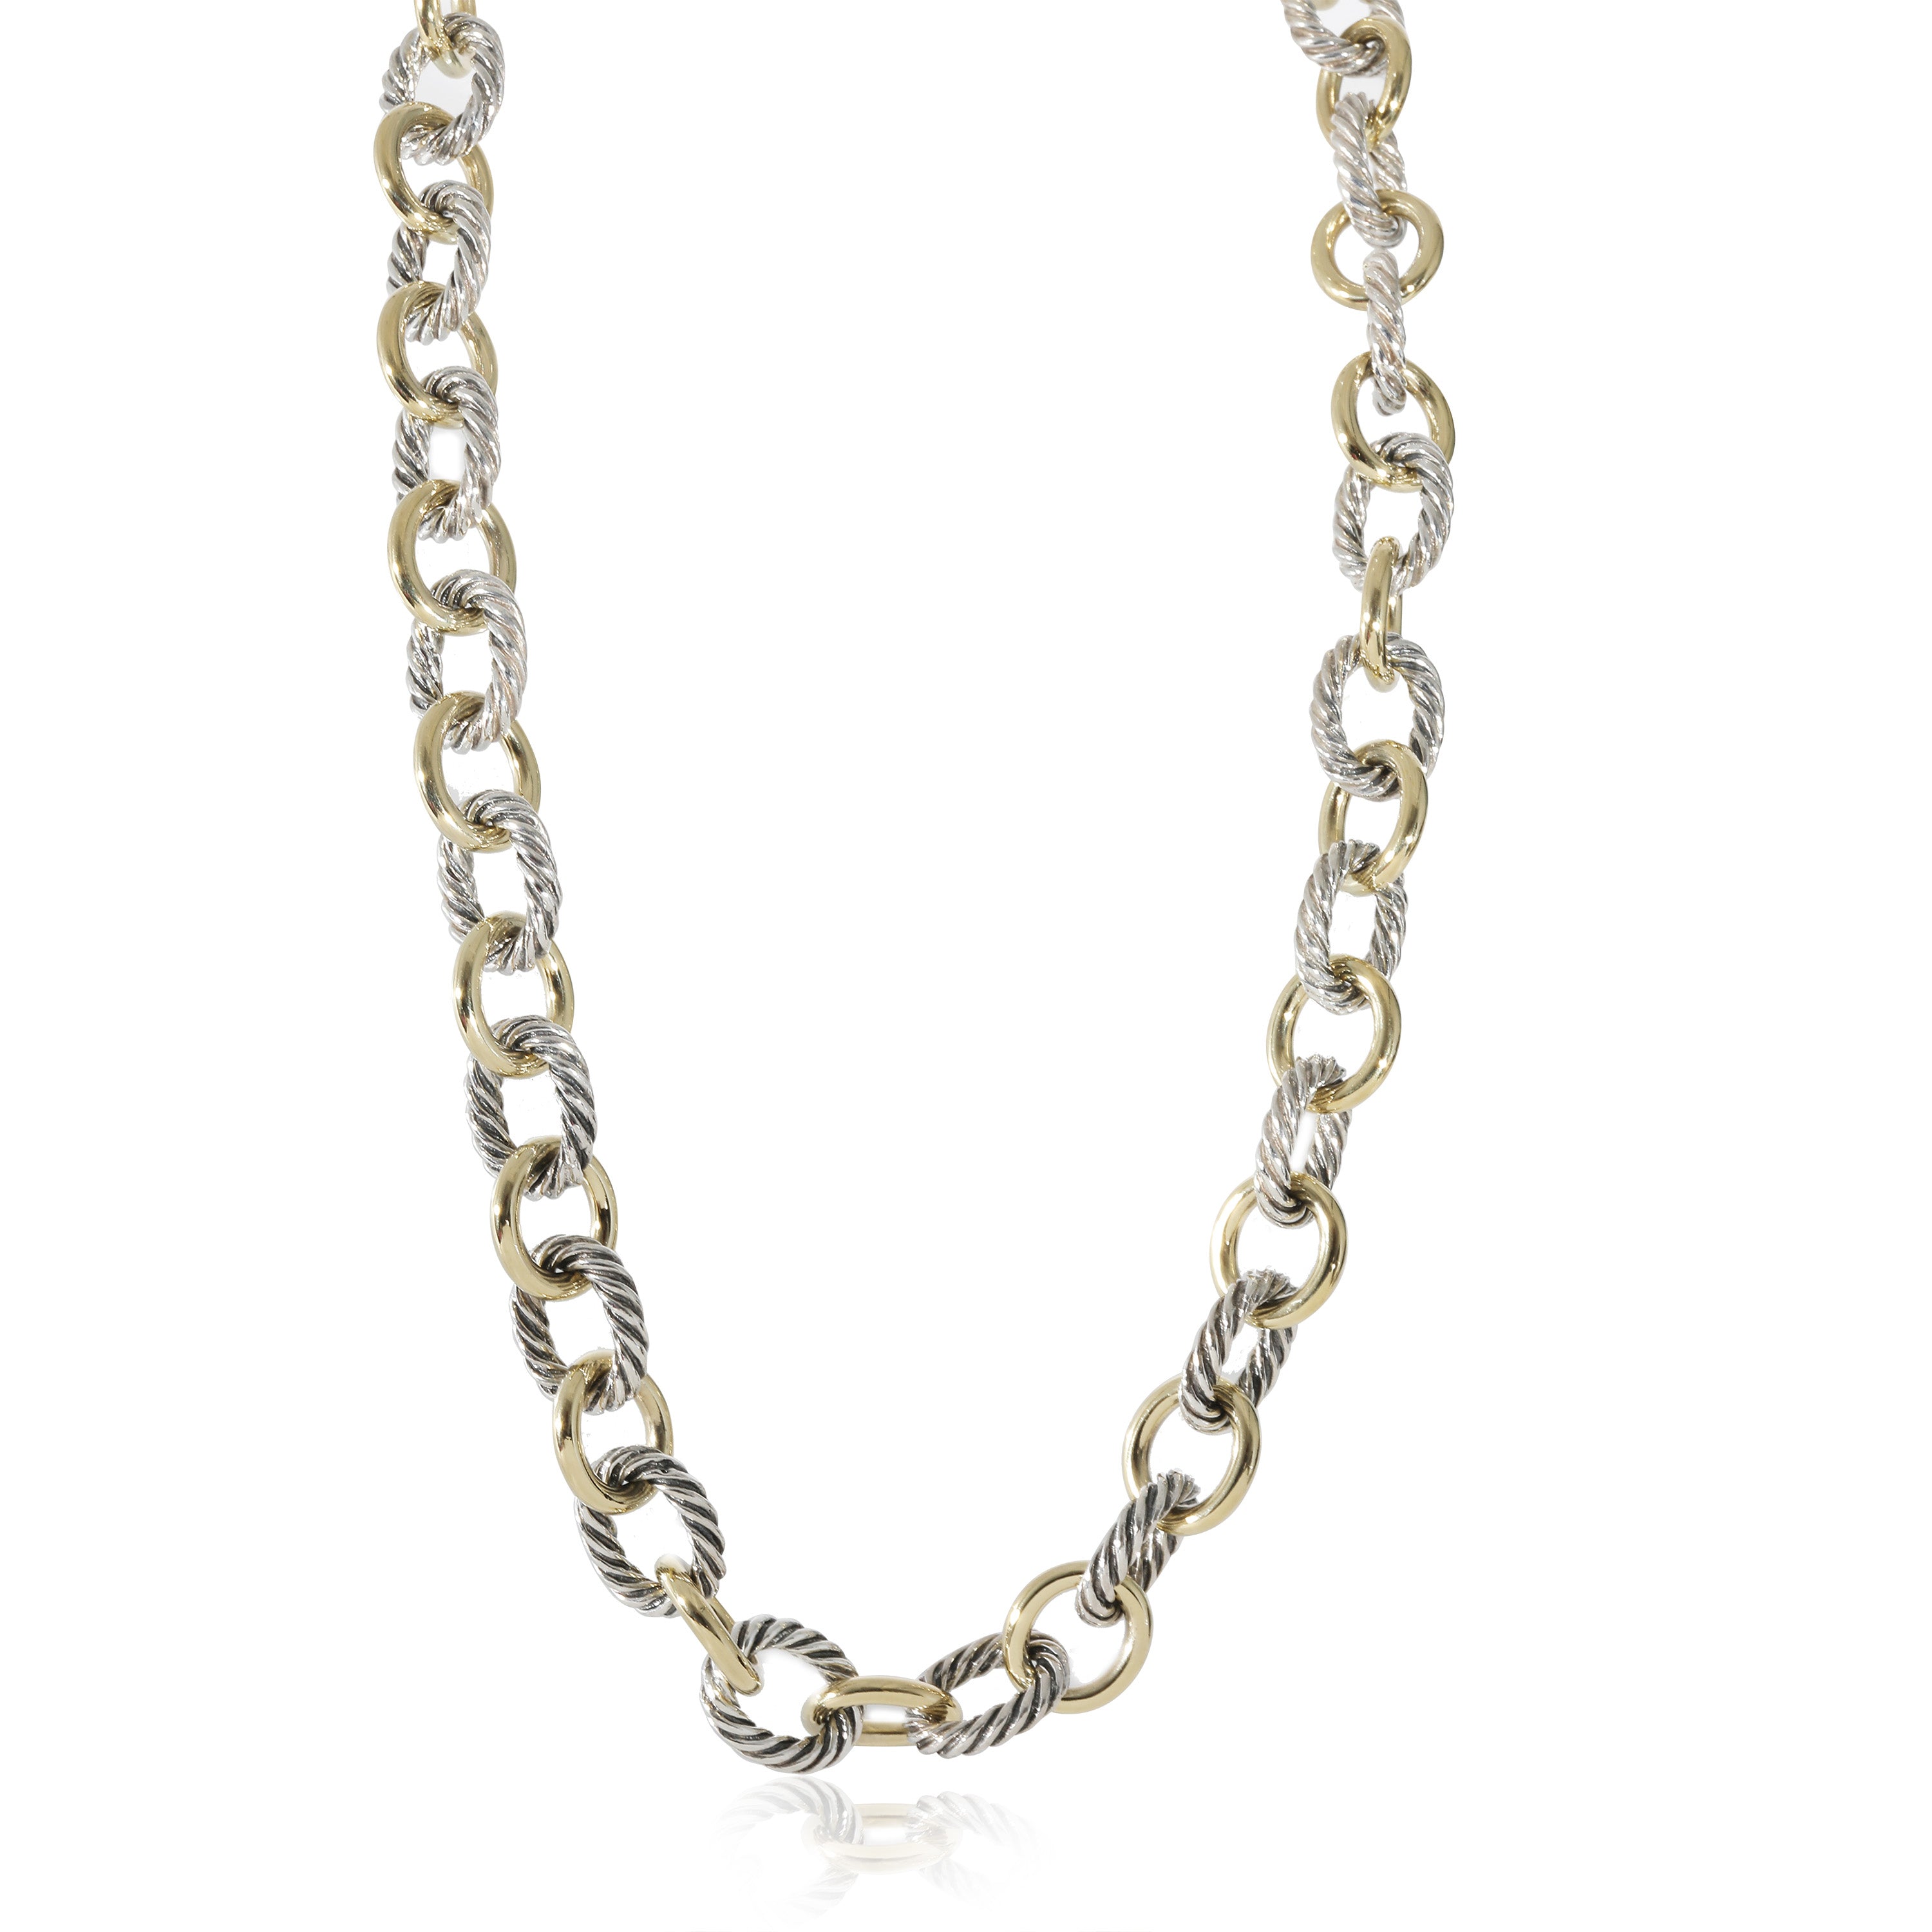 David Yurman Extra Large Oval Link Necklace - Sterling Silver Chain,  Necklaces - DVY144630 | The RealReal